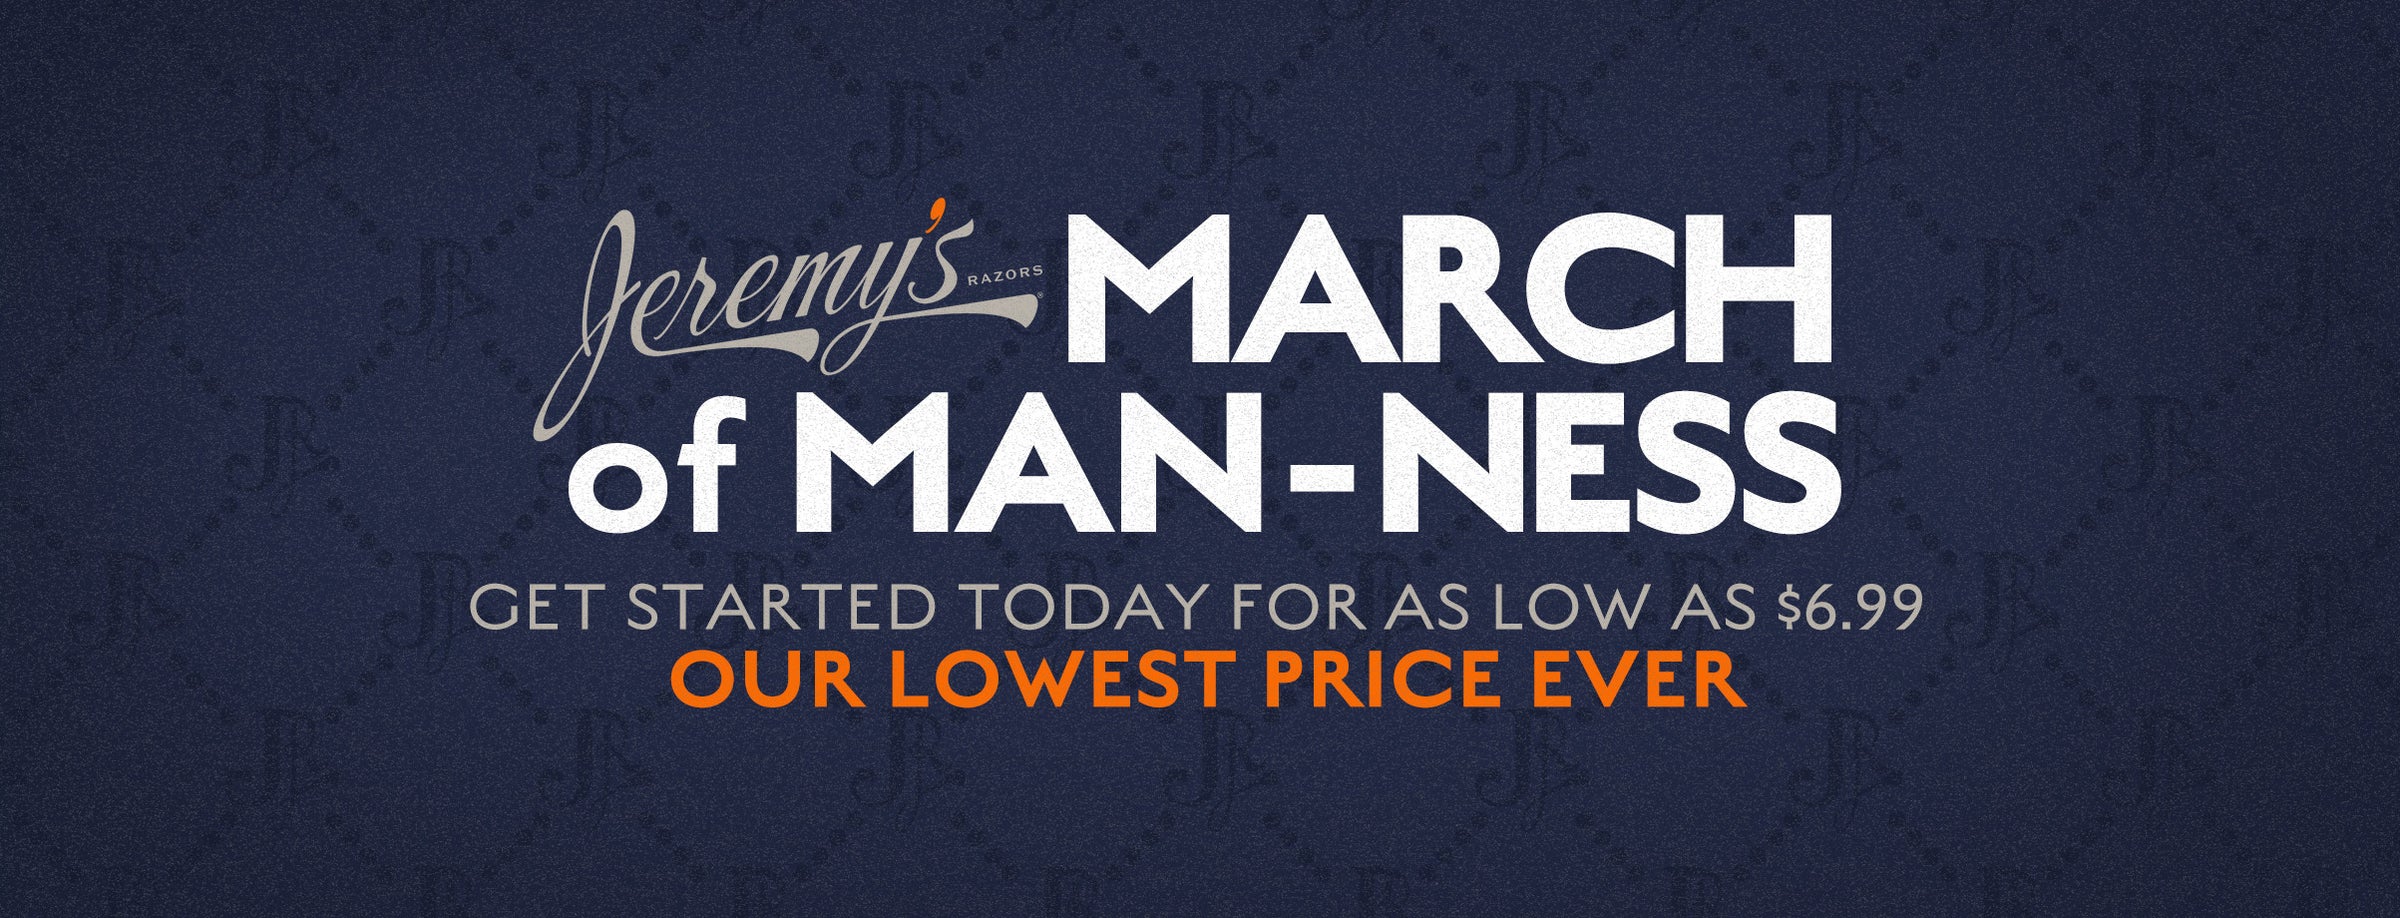 Jeremy's March of Man-ness. Get started today for as low as $6.99. Our LOWEST PRICE EVER.